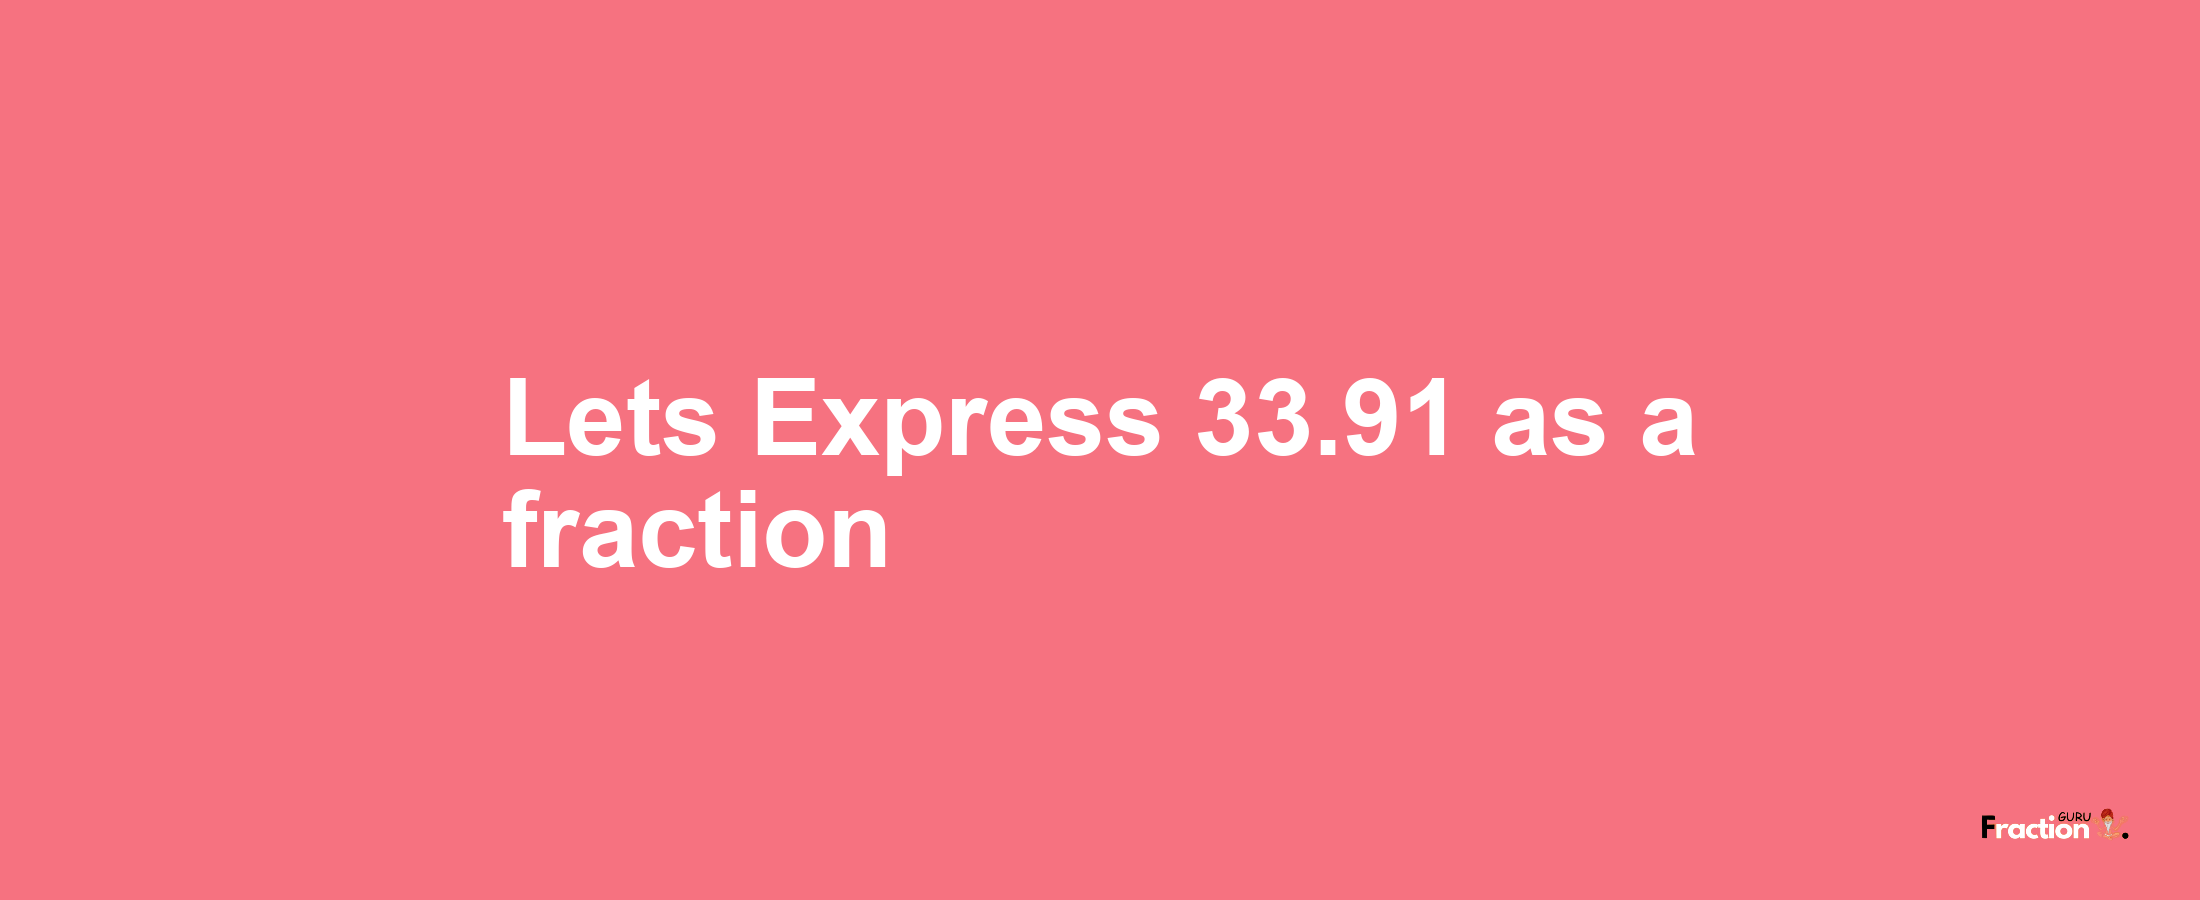 Lets Express 33.91 as afraction